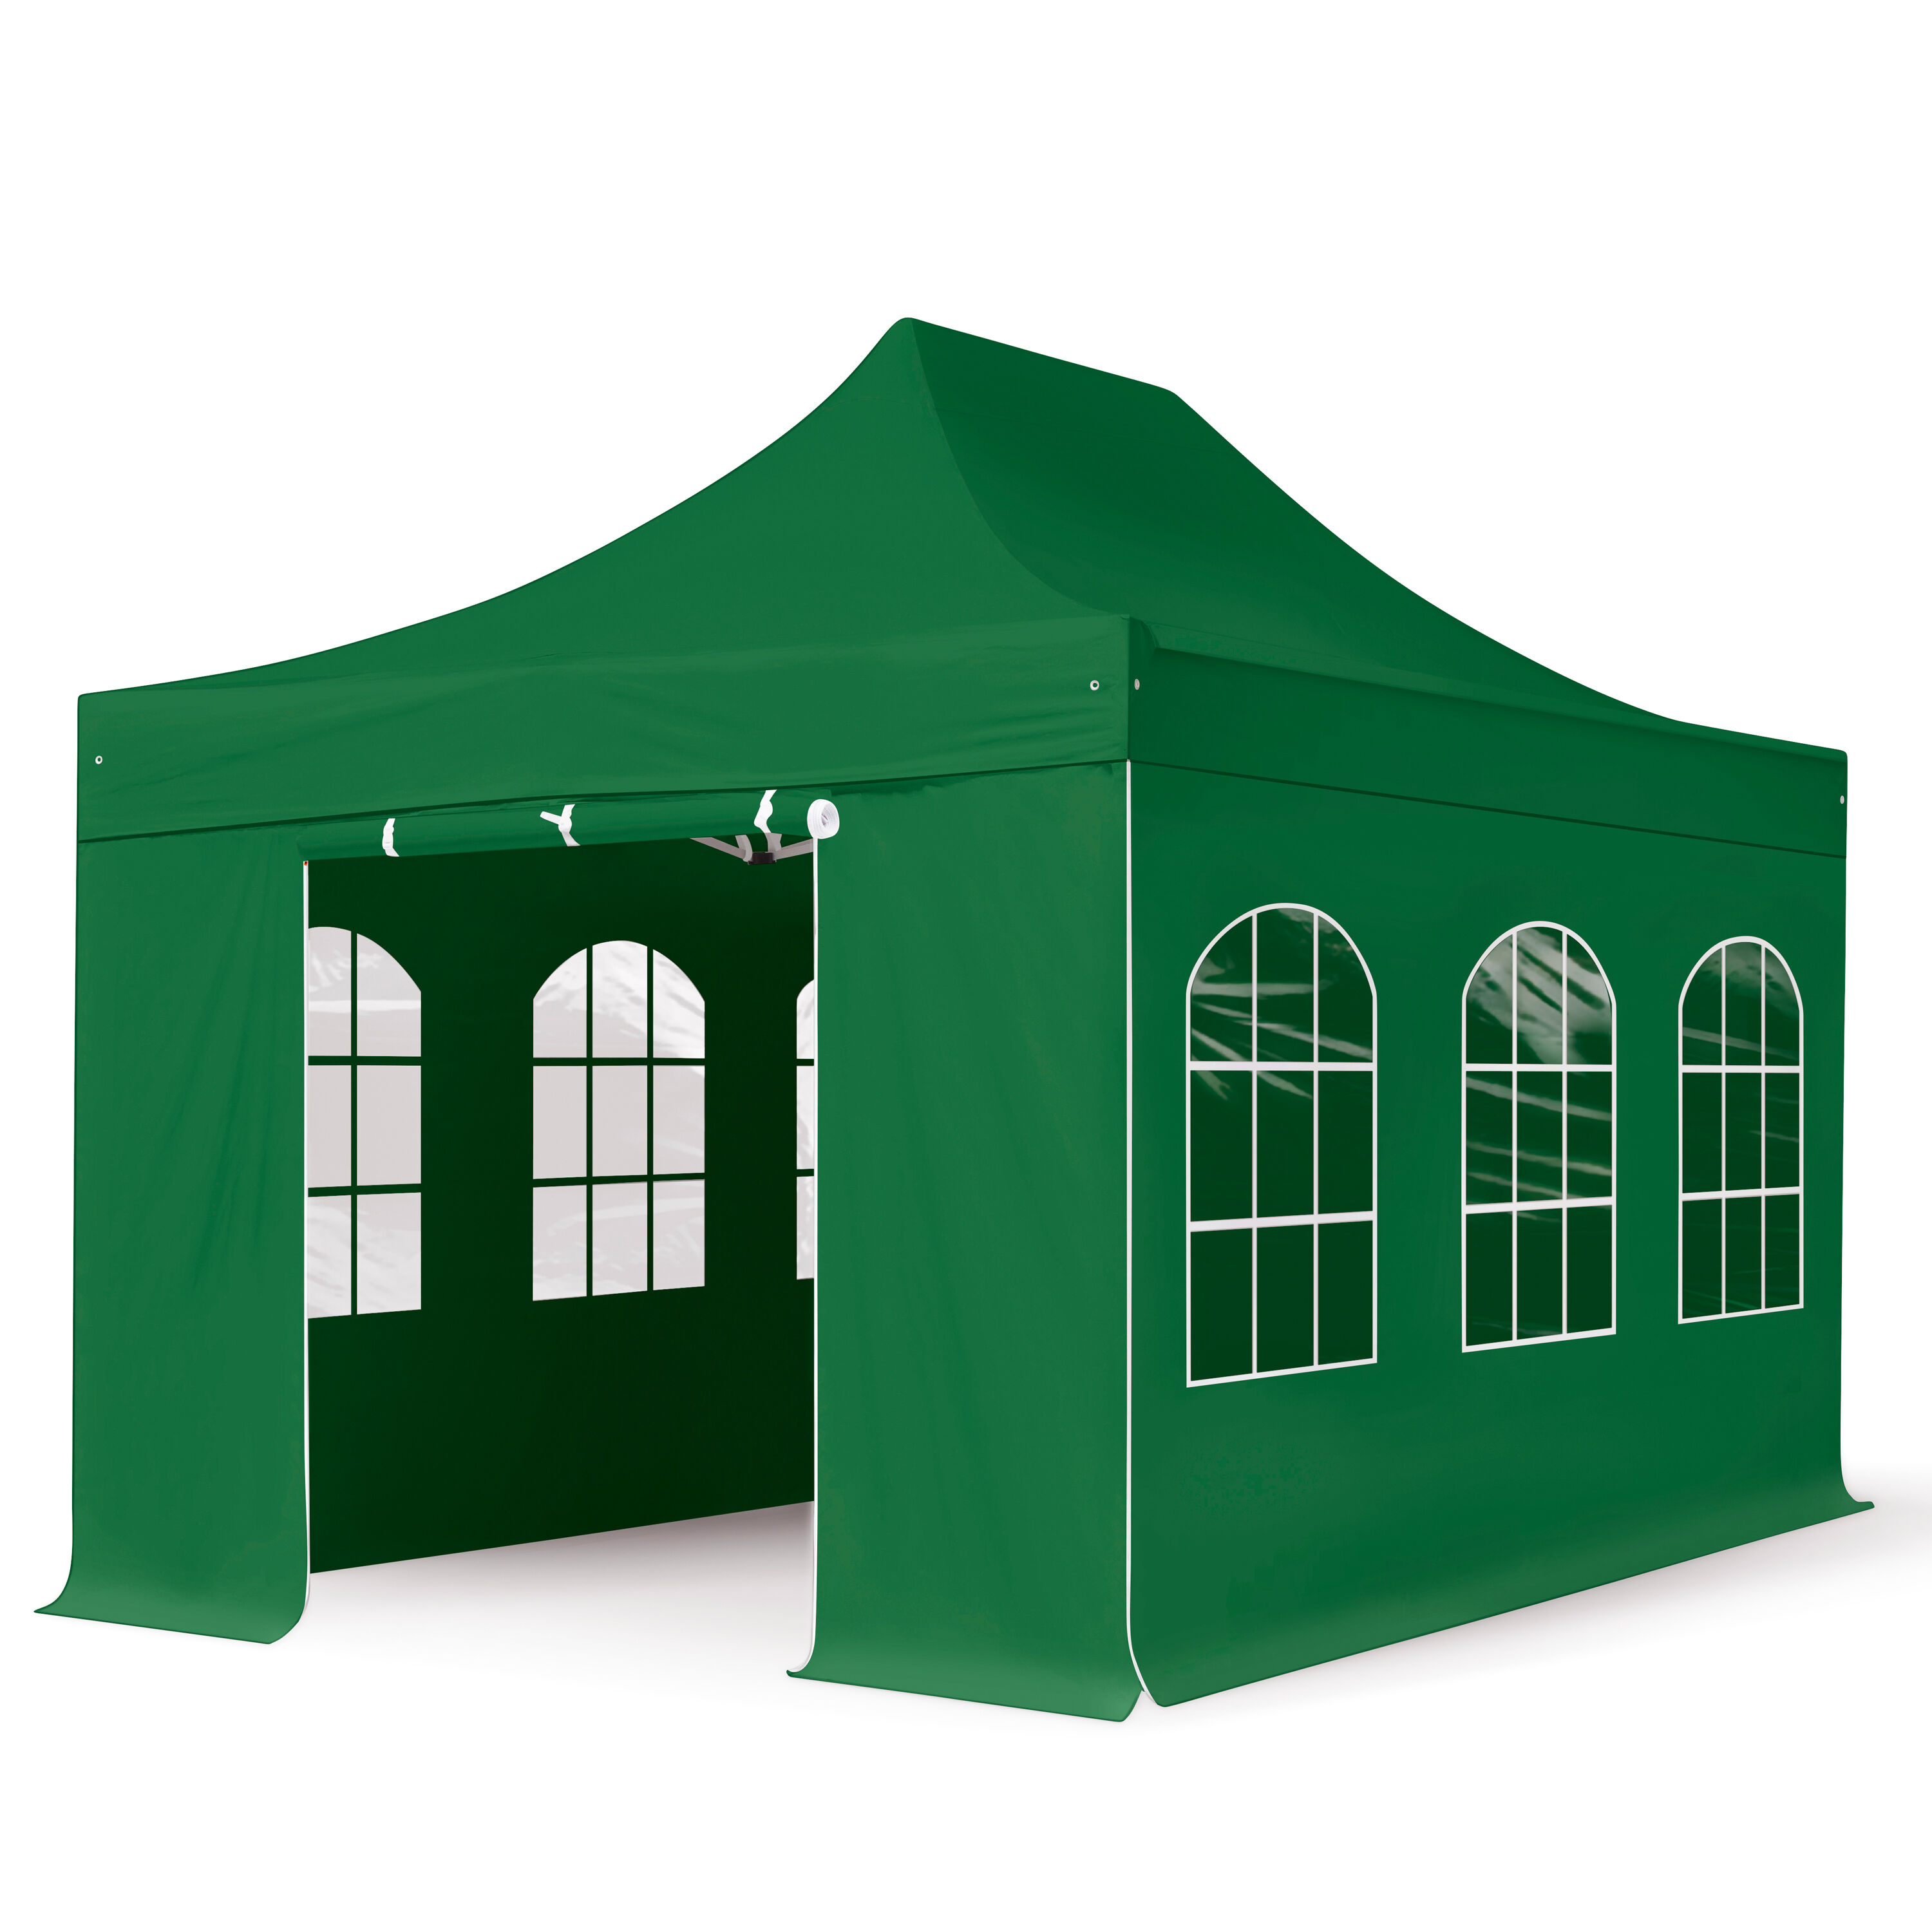 TOOLPORT Easy up Partytent 3x4,5m Hoogwaardig polyester 400 g/m² donkergroen waterdicht Easy Up Tent, Pop Up Partytent, Harmonicatent, Vouwtent